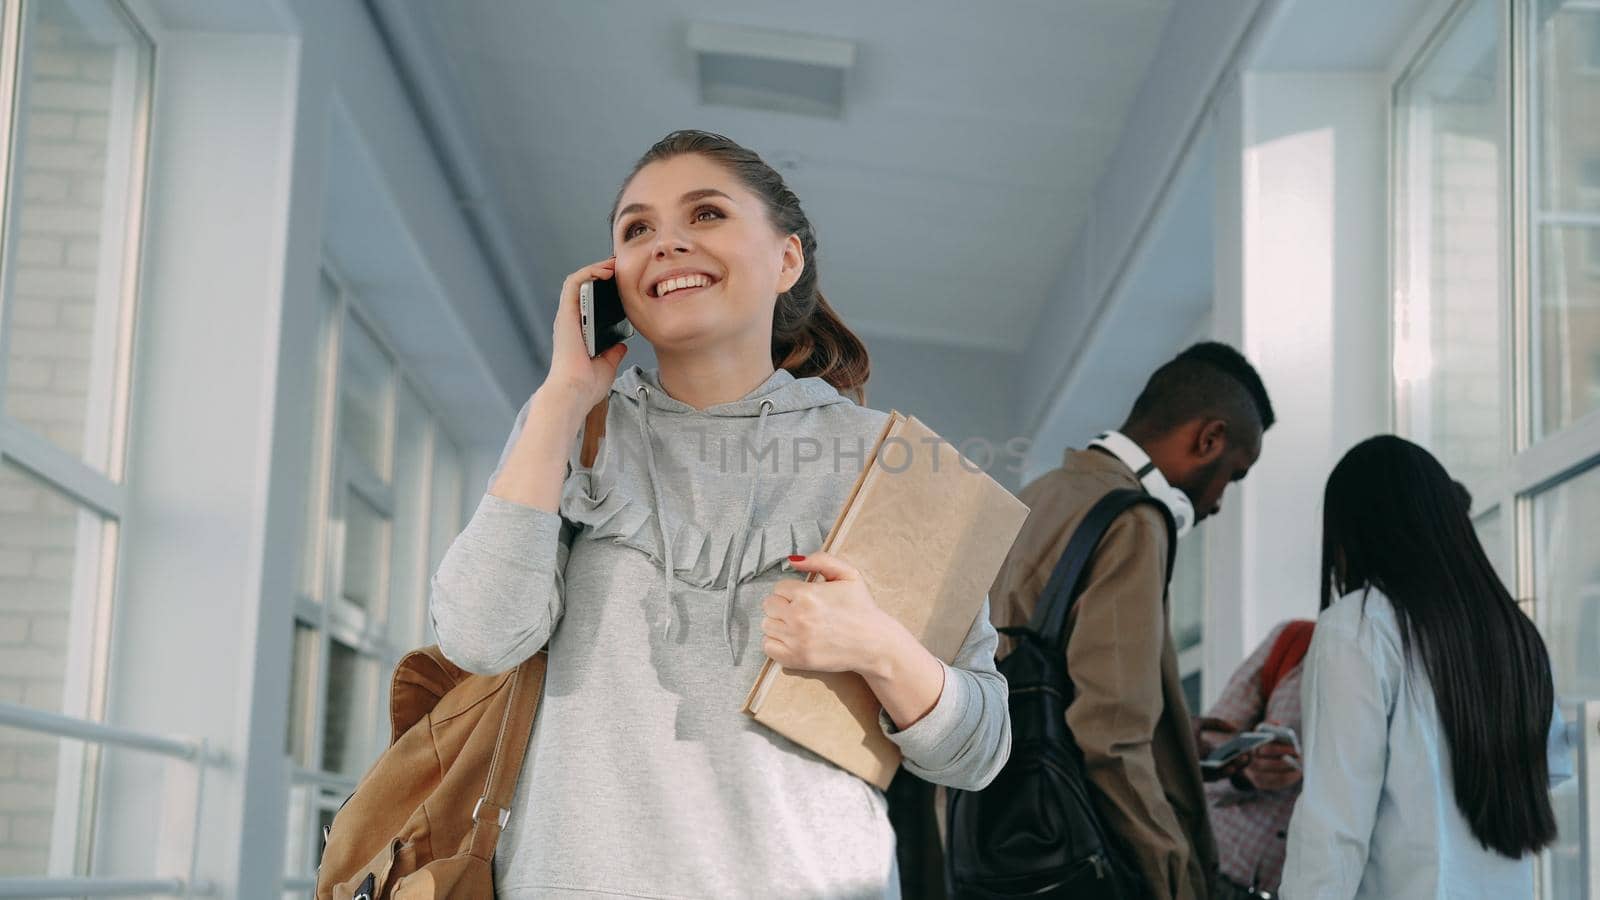 Portrait of young beautiful female student wearing casual clothes talking on phone in positive way while her multi-ethnic groupmates are standing behind her discussing something lively.